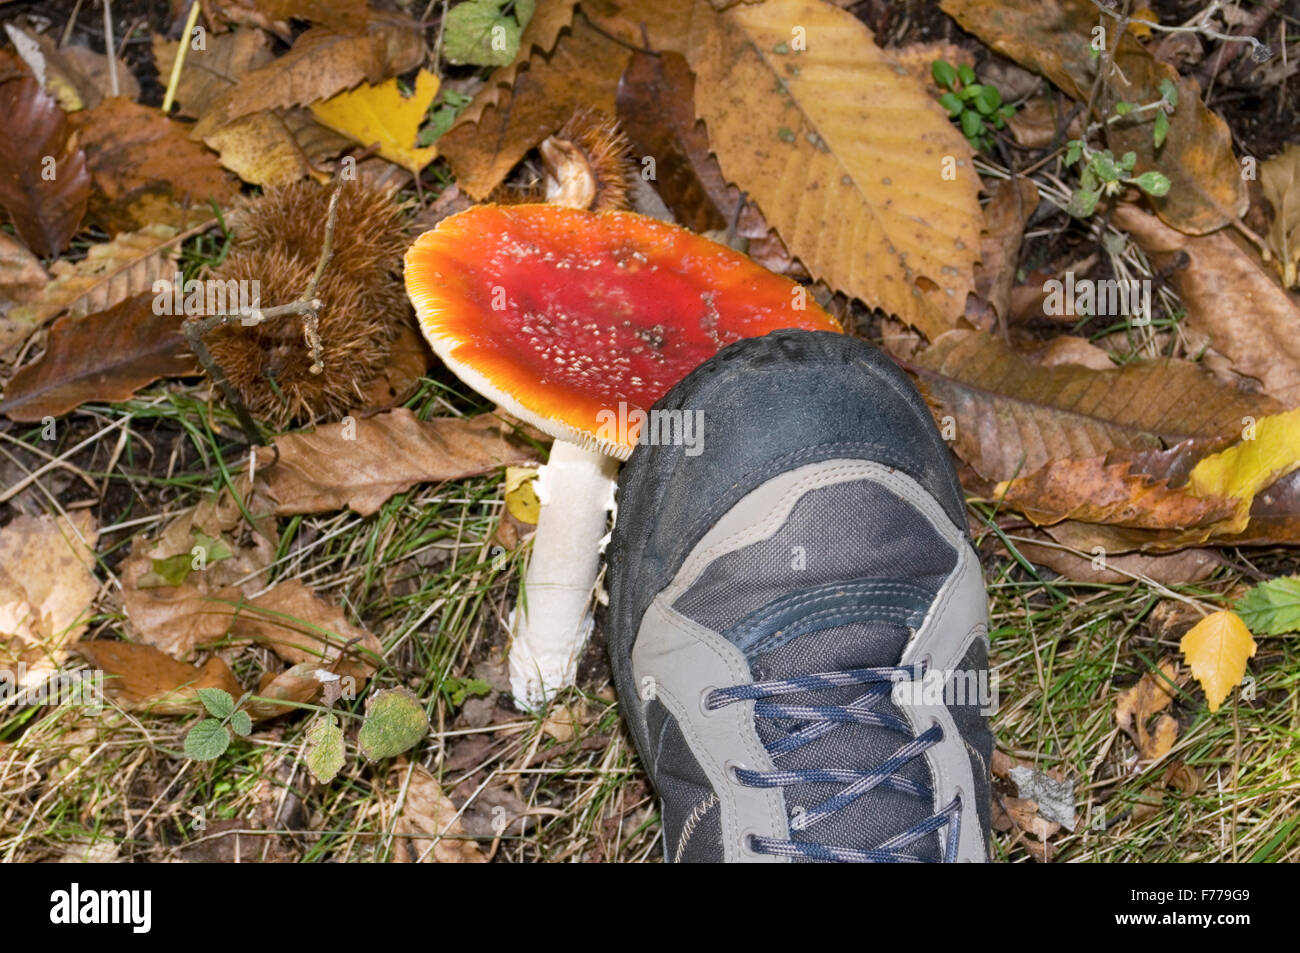 Poisonous mushroom being crushed by a hiking boot Stock Photo